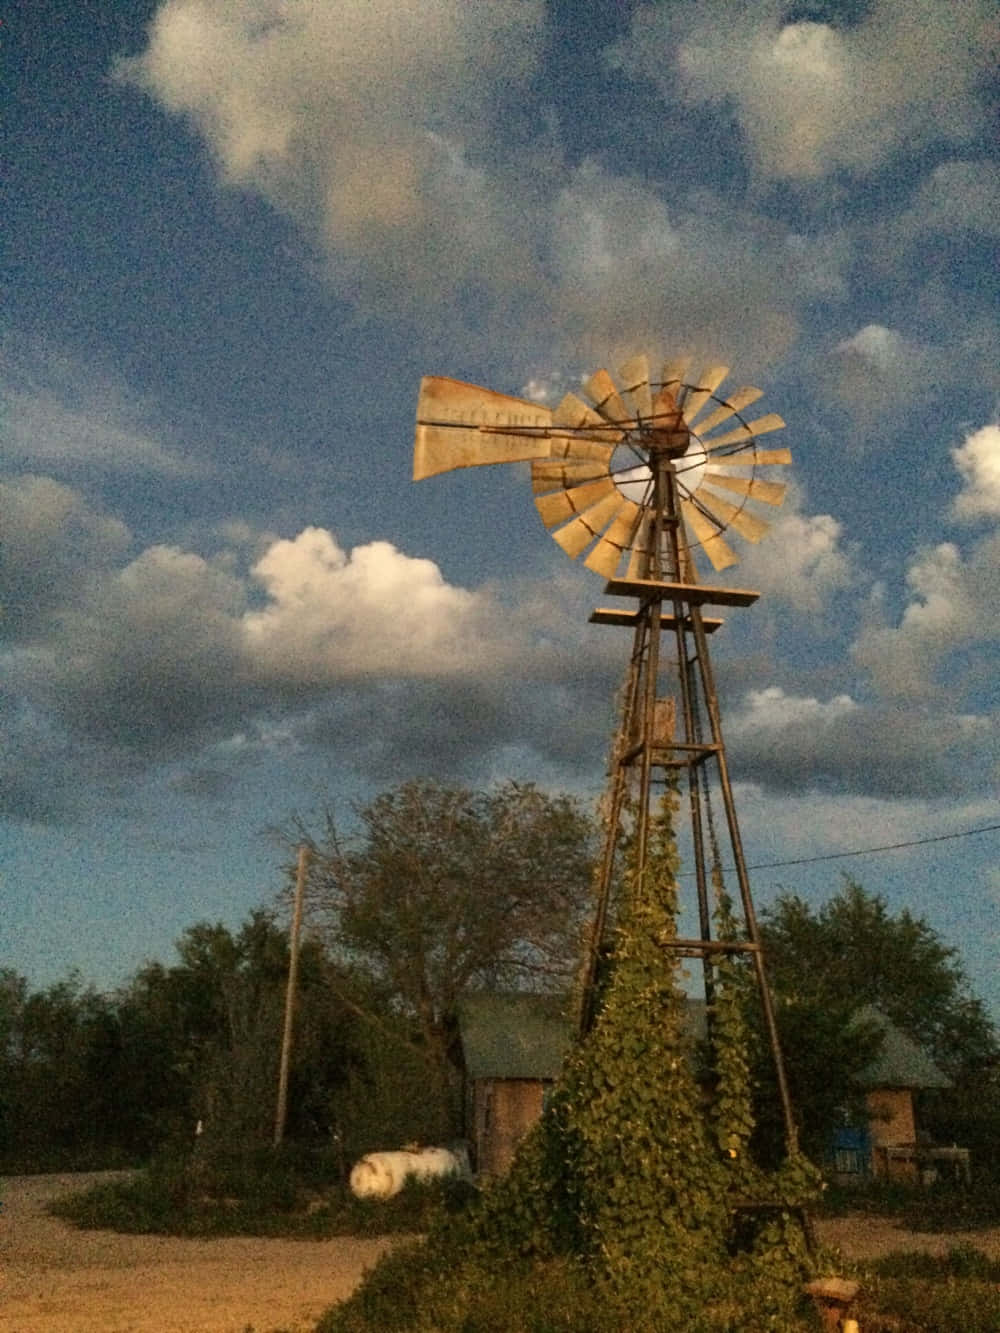 An old windmill stands tall and strong in a field of golden wildflowers